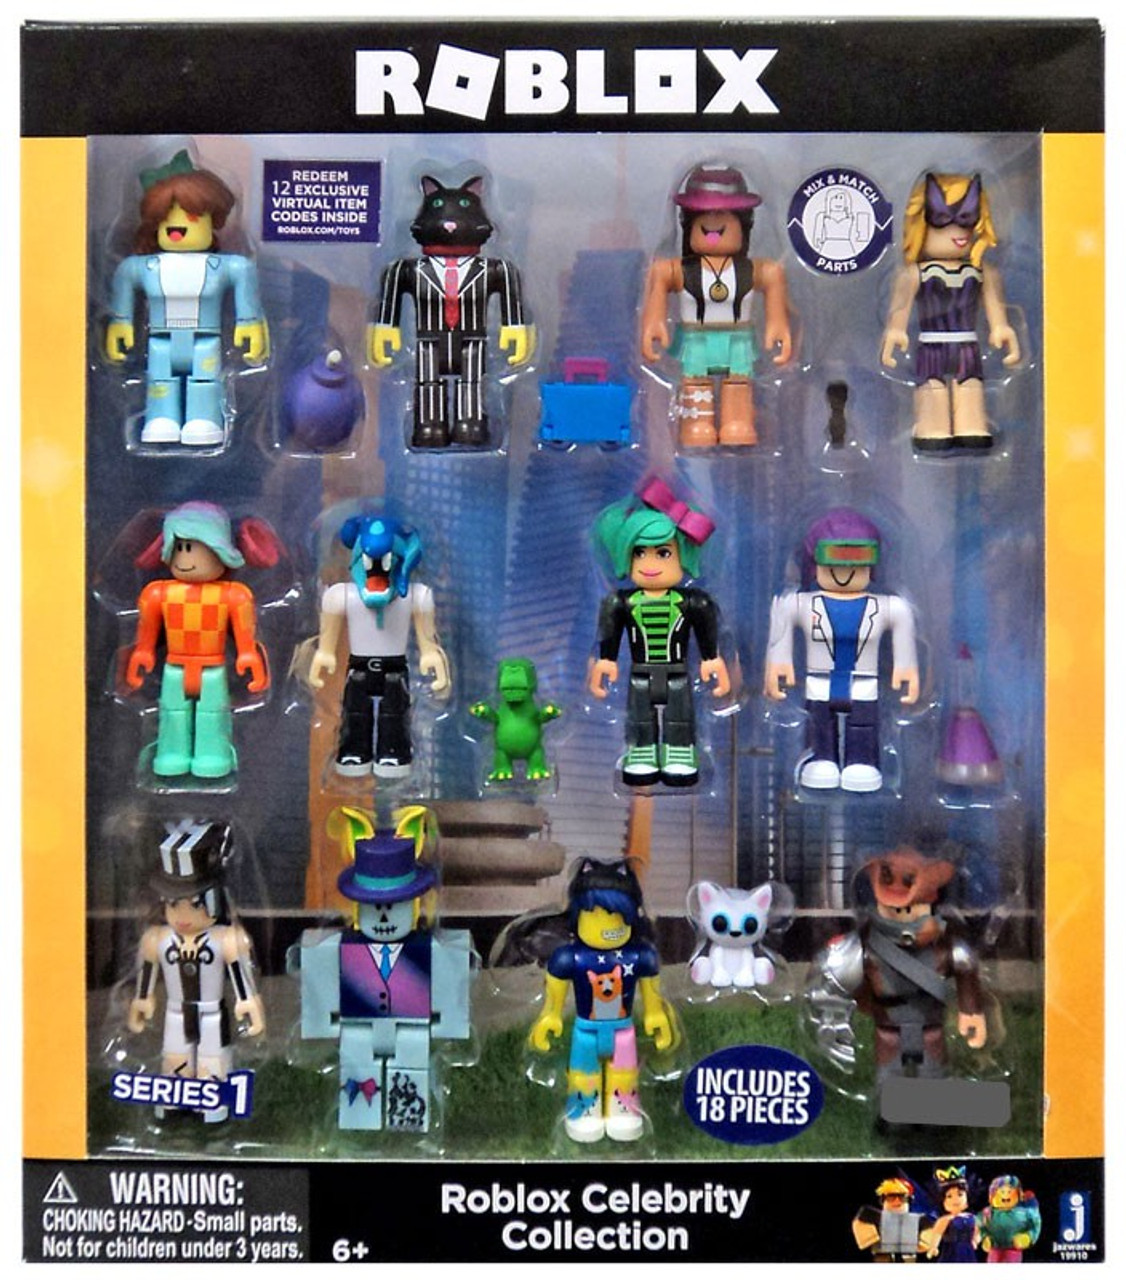 Roblox Series 1 Celebrity Collection Exclusive 3 Action Figure 12 Pack Jazwares Toywiz - roblox series 2 celebrity collection exclusive action figure 12 pack damaged package